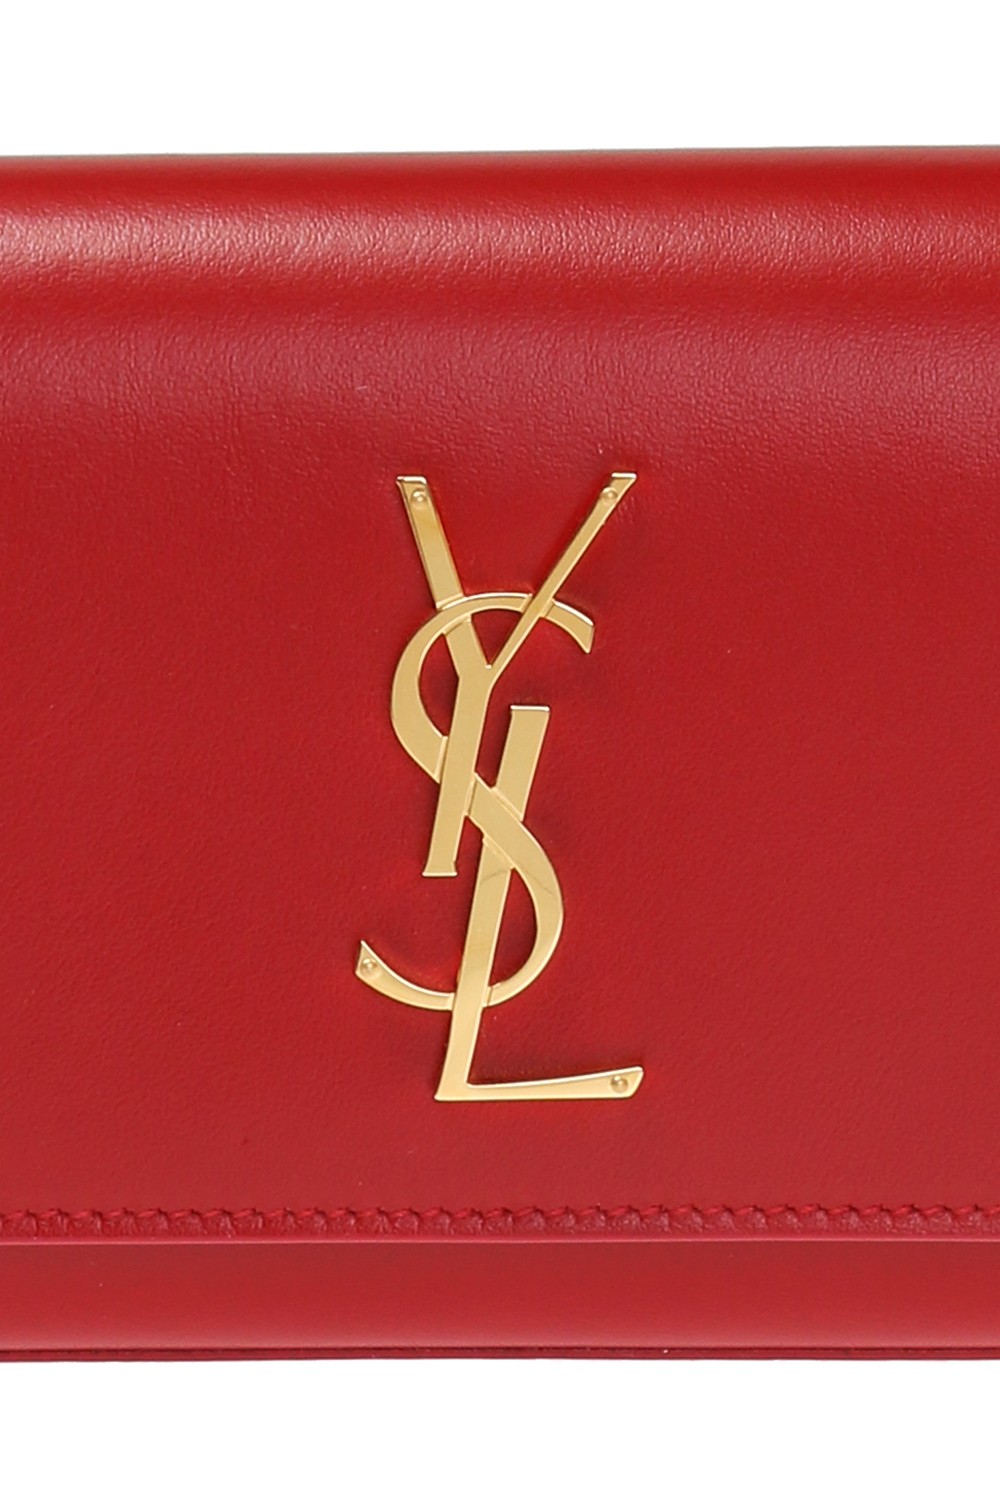 Saint Laurent Kate Belt Bag Red in Calfskin Leather with Gold-tone